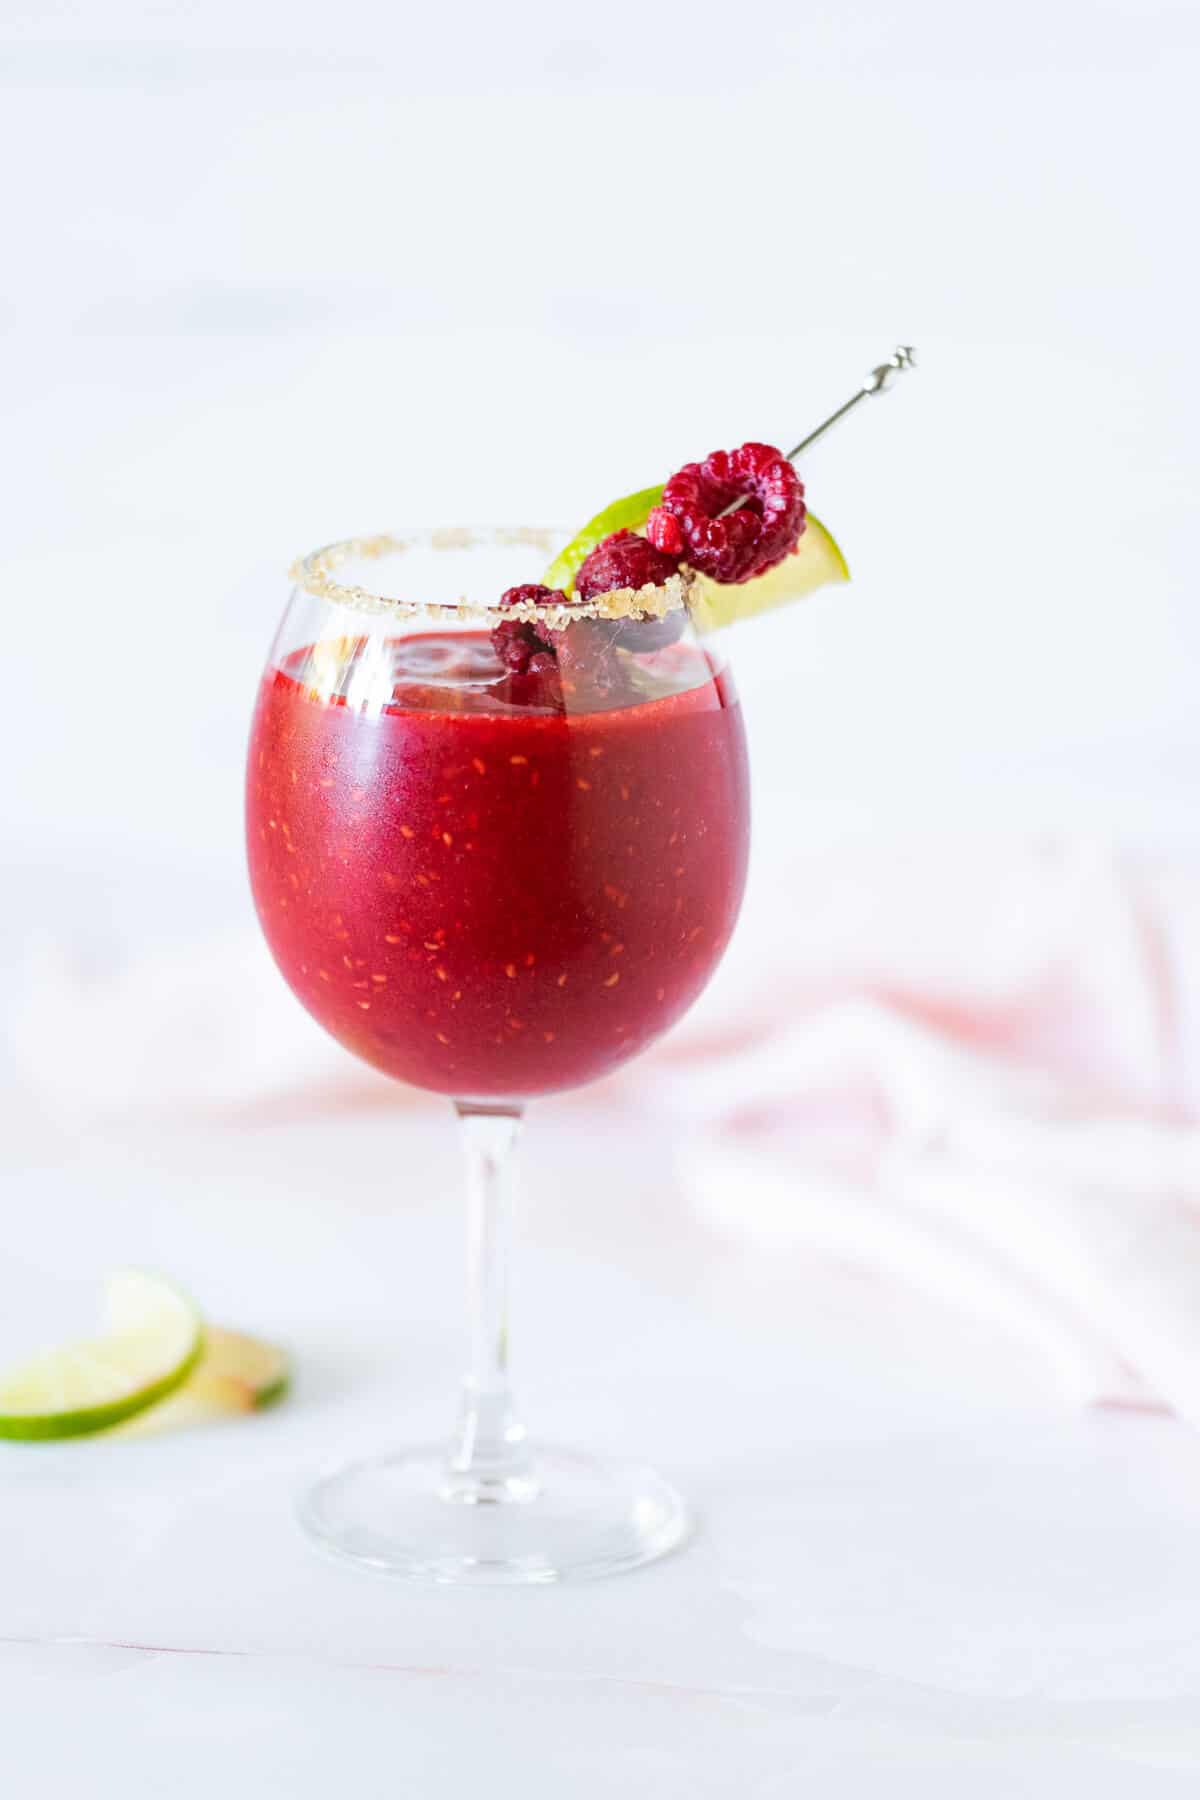 Virgin Raspberry Daiquiri in a stemmed glass with sugar on the rim and garnished with raspberries and a lime wedge.